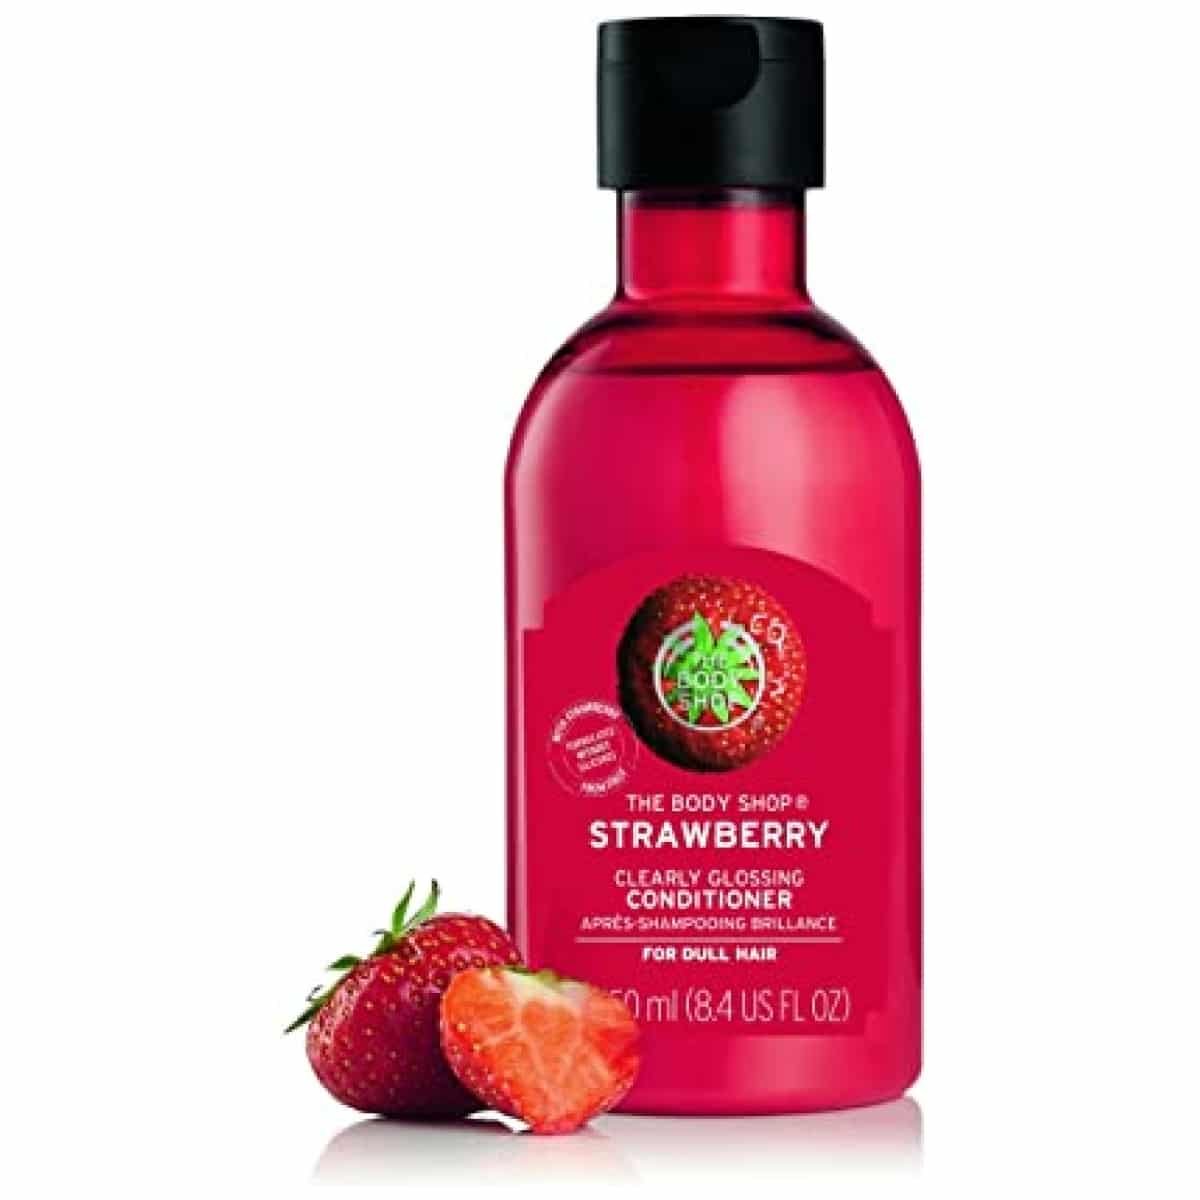 The Body Shop Strawberry Clearly Glossing Conditioner 250Ml